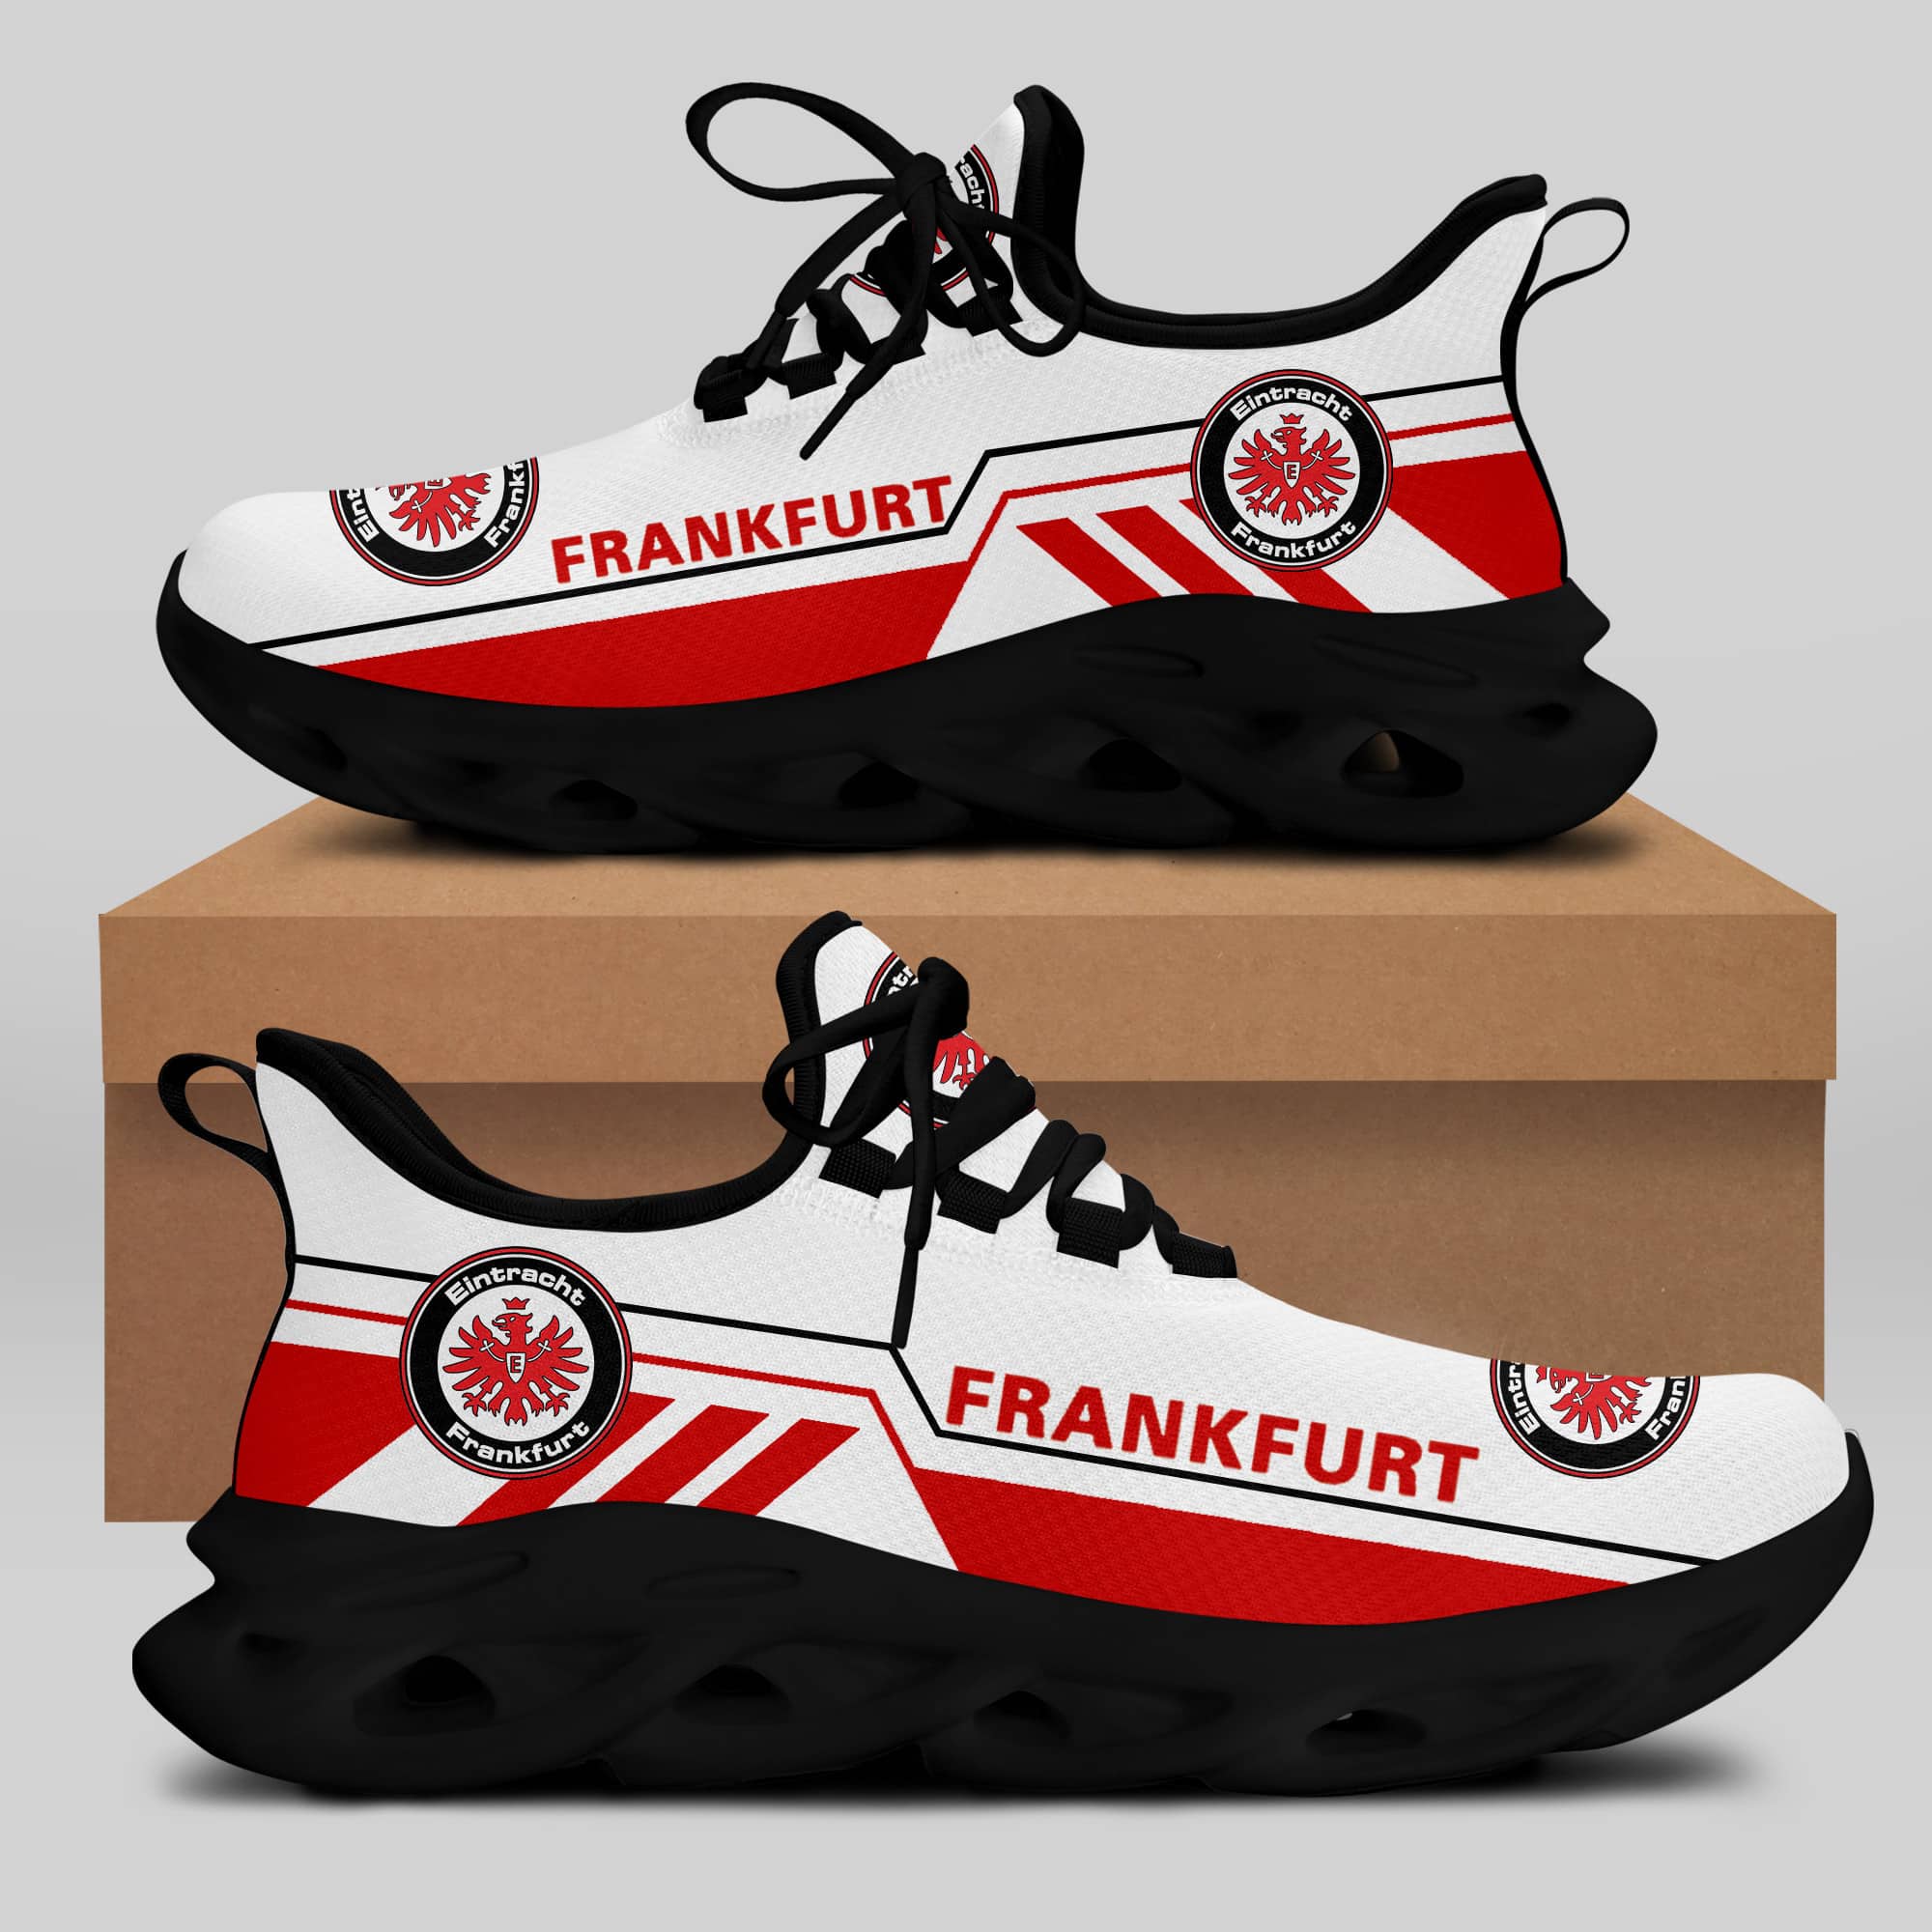 Eintracht Frankfurt Running Shoes Max Soul Shoes Sneakers Ver 14 2